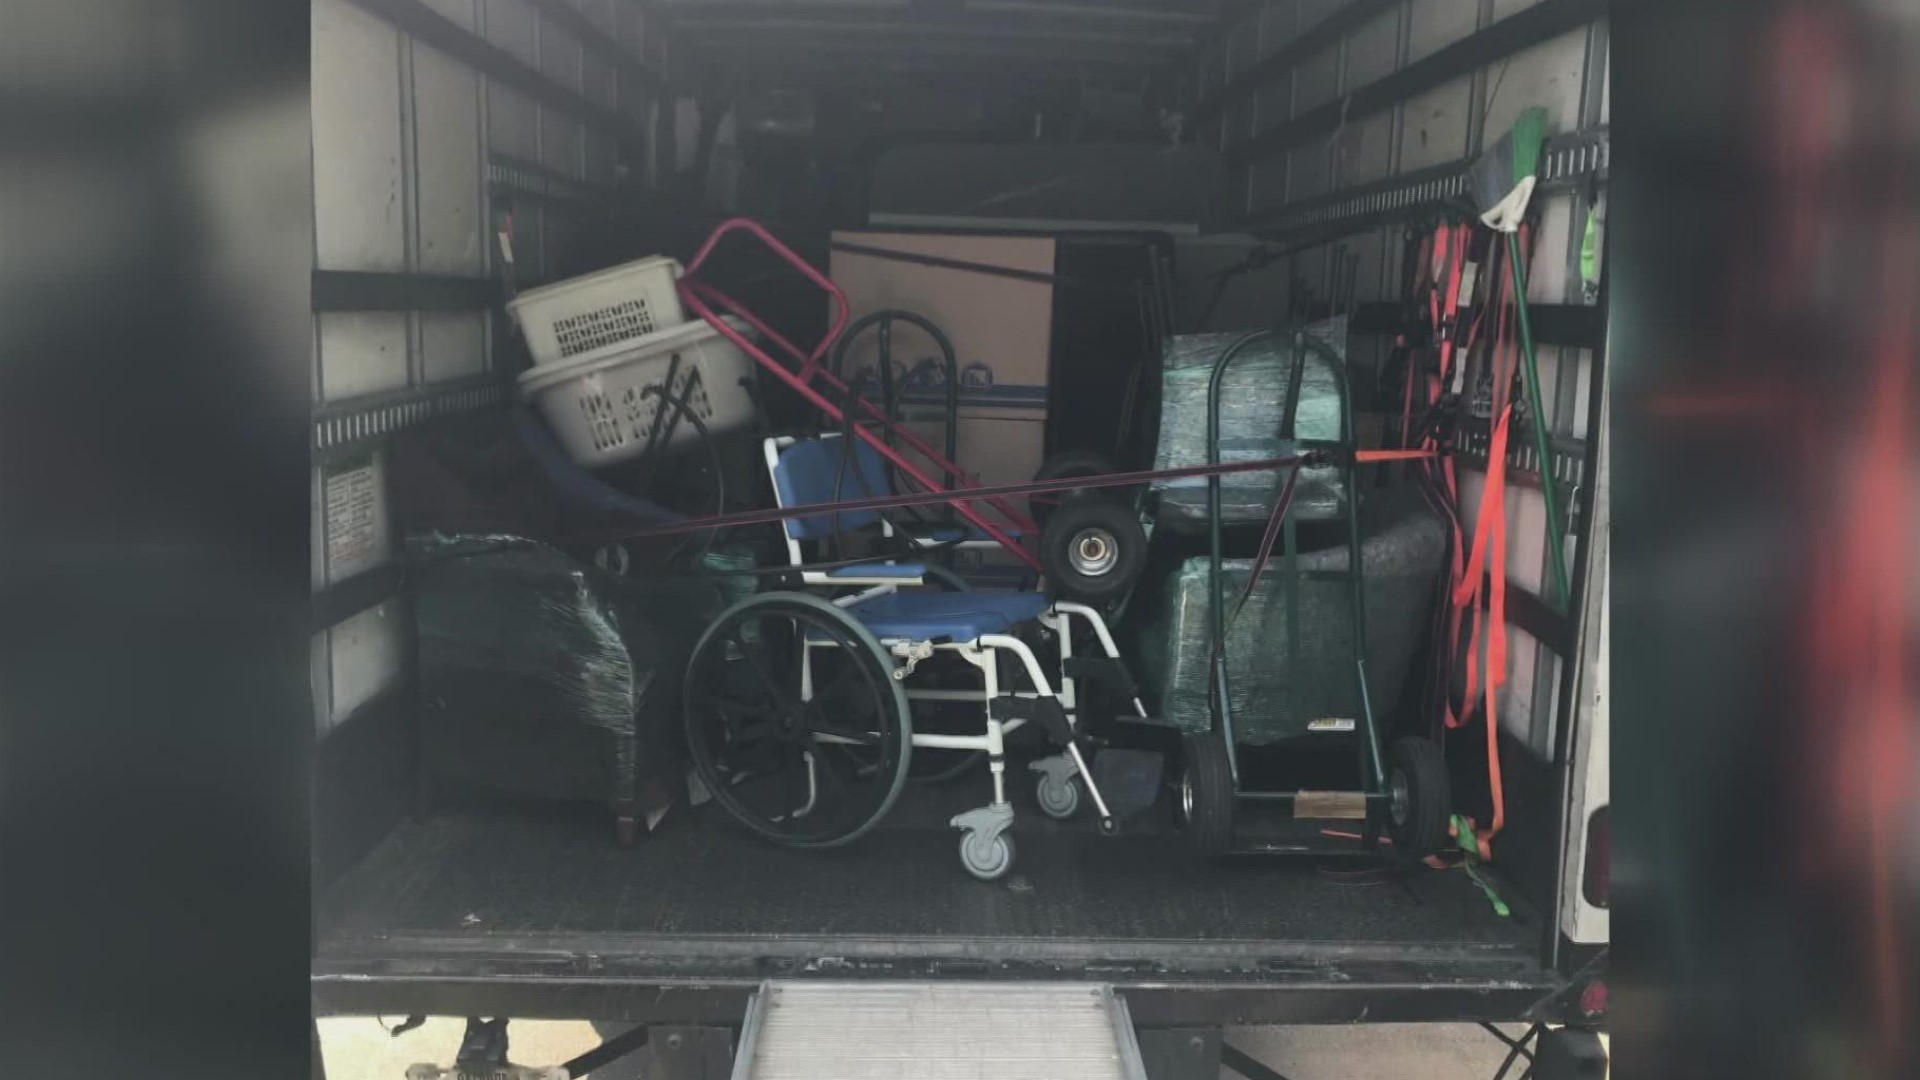 Customers complained that Road to Load Best Movers, LLC didn't deliver, upcharged or even held items for hostage. The attorney general is calling it racketeering.